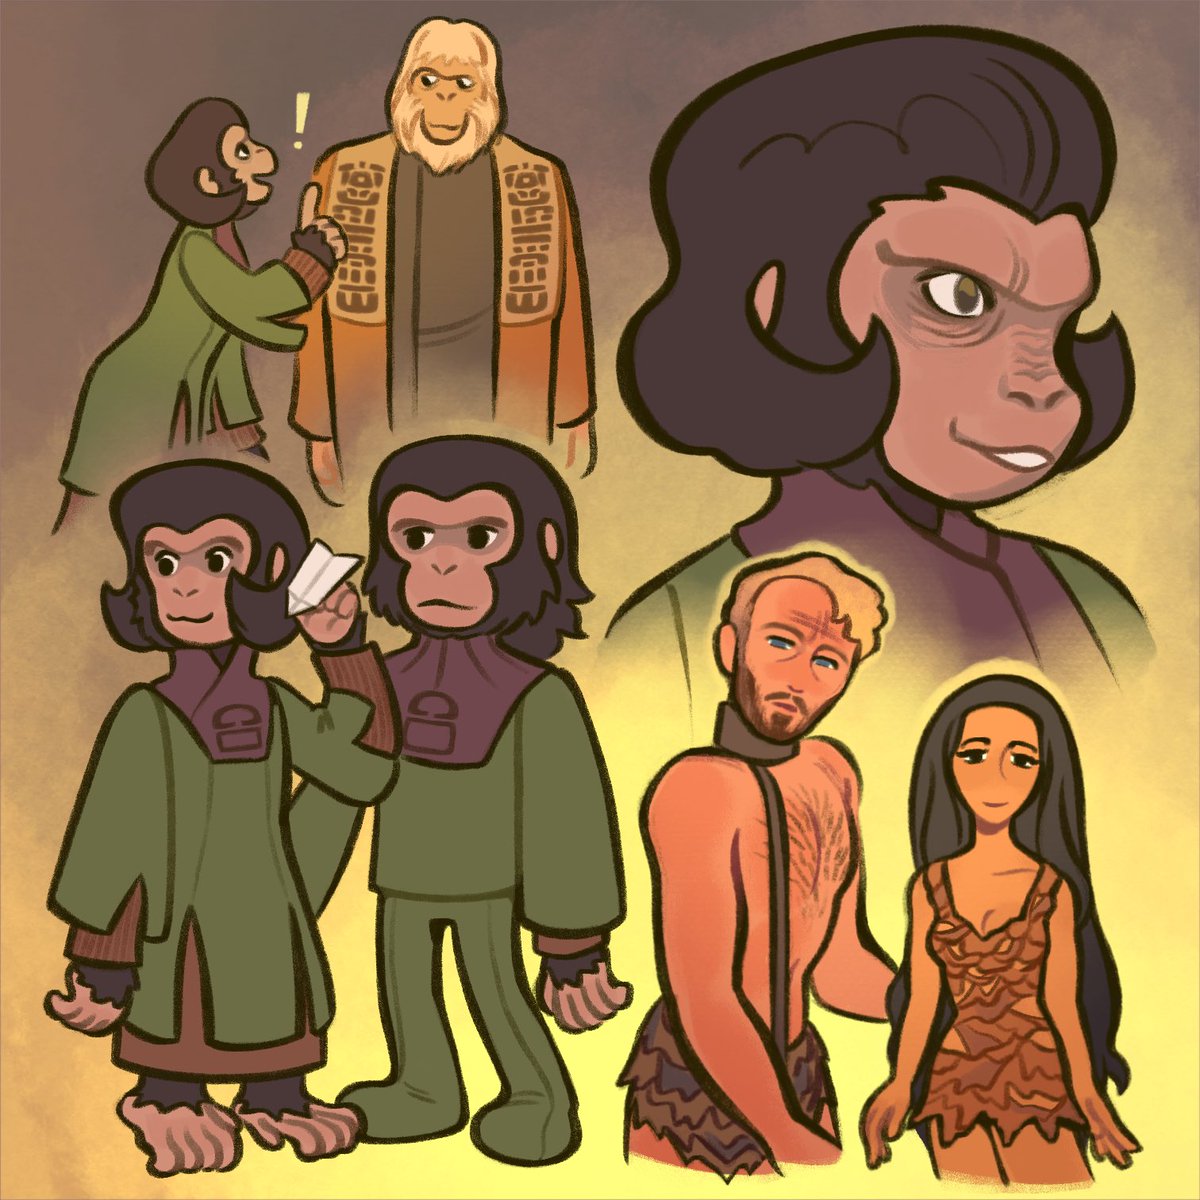 I watched the original Planet of the Apes movie recently (because I love the newer ones) and I really enjoyed it. Dr. Zira’s my fave